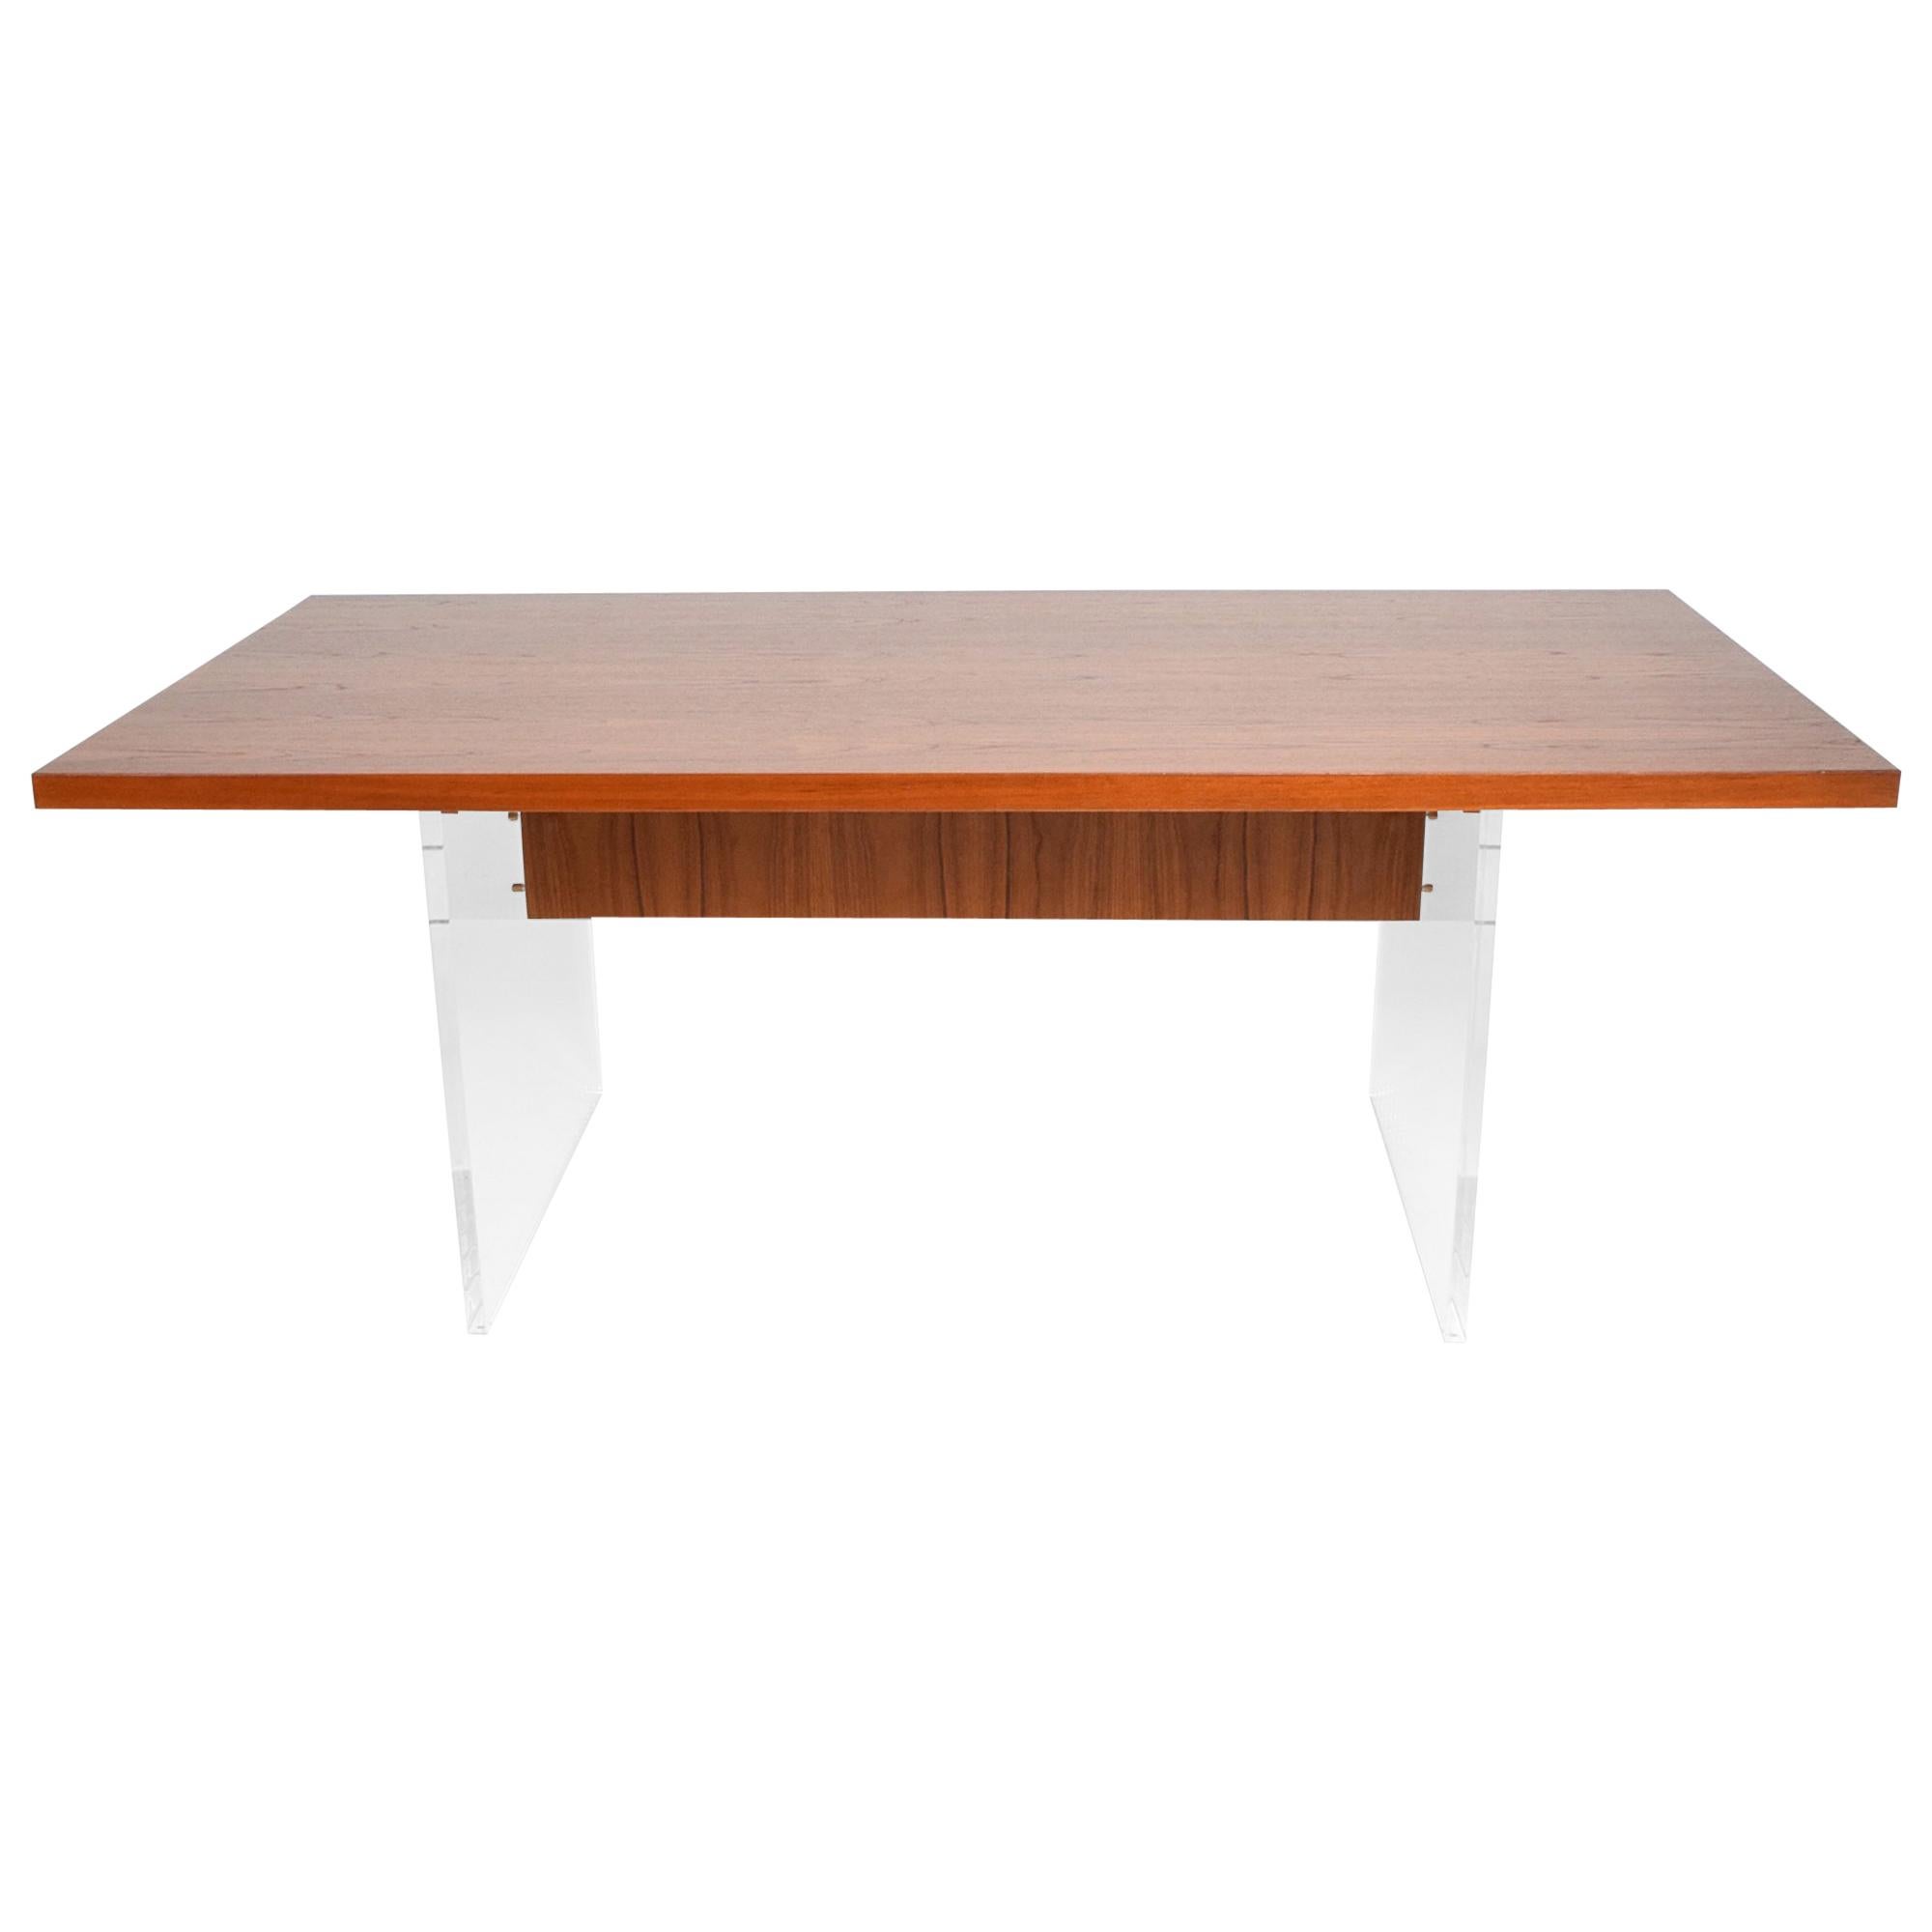 1970s Modern Dining Conference Table Style of Hans Wegner Teakwood and Lucite